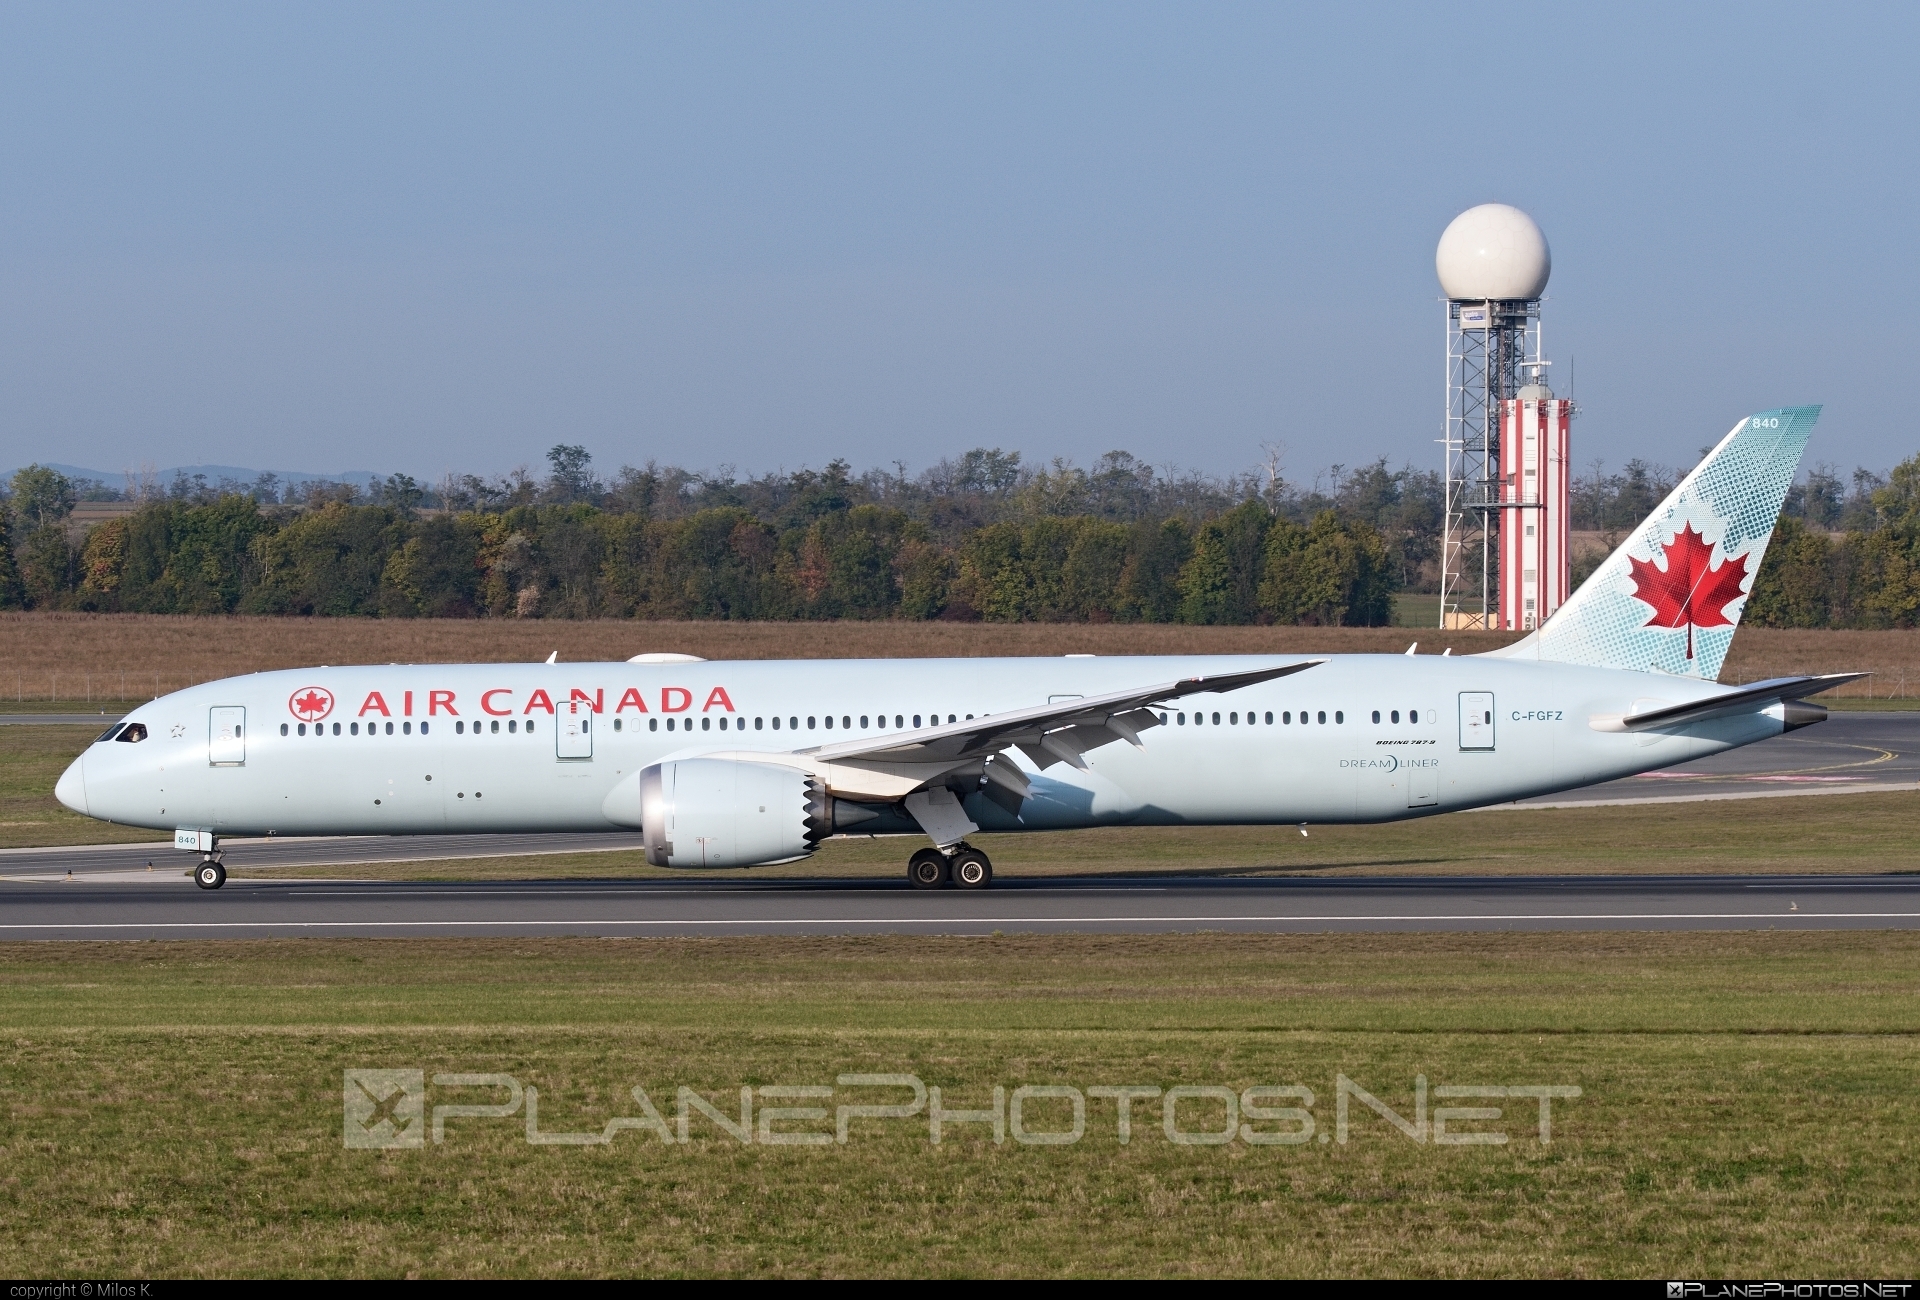 Boeing 787-9 Dreamliner - C-FGFZ operated by Air Canada #airCanada #b787 #boeing #boeing787 #dreamliner